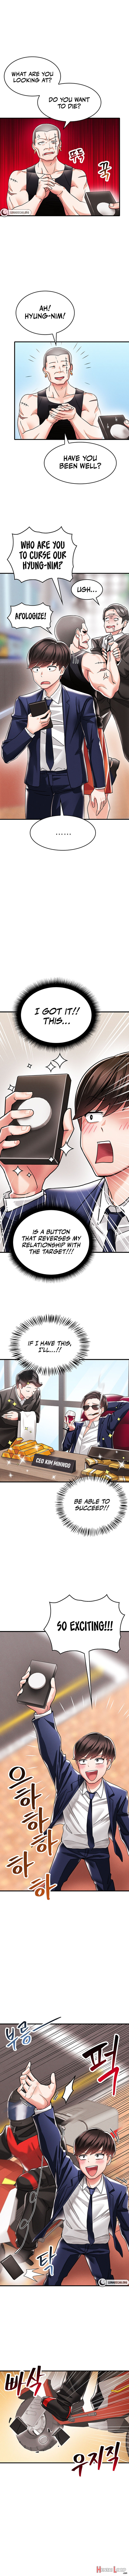 Relationship Reverse Button: Let’s Make Her Submissive page 21